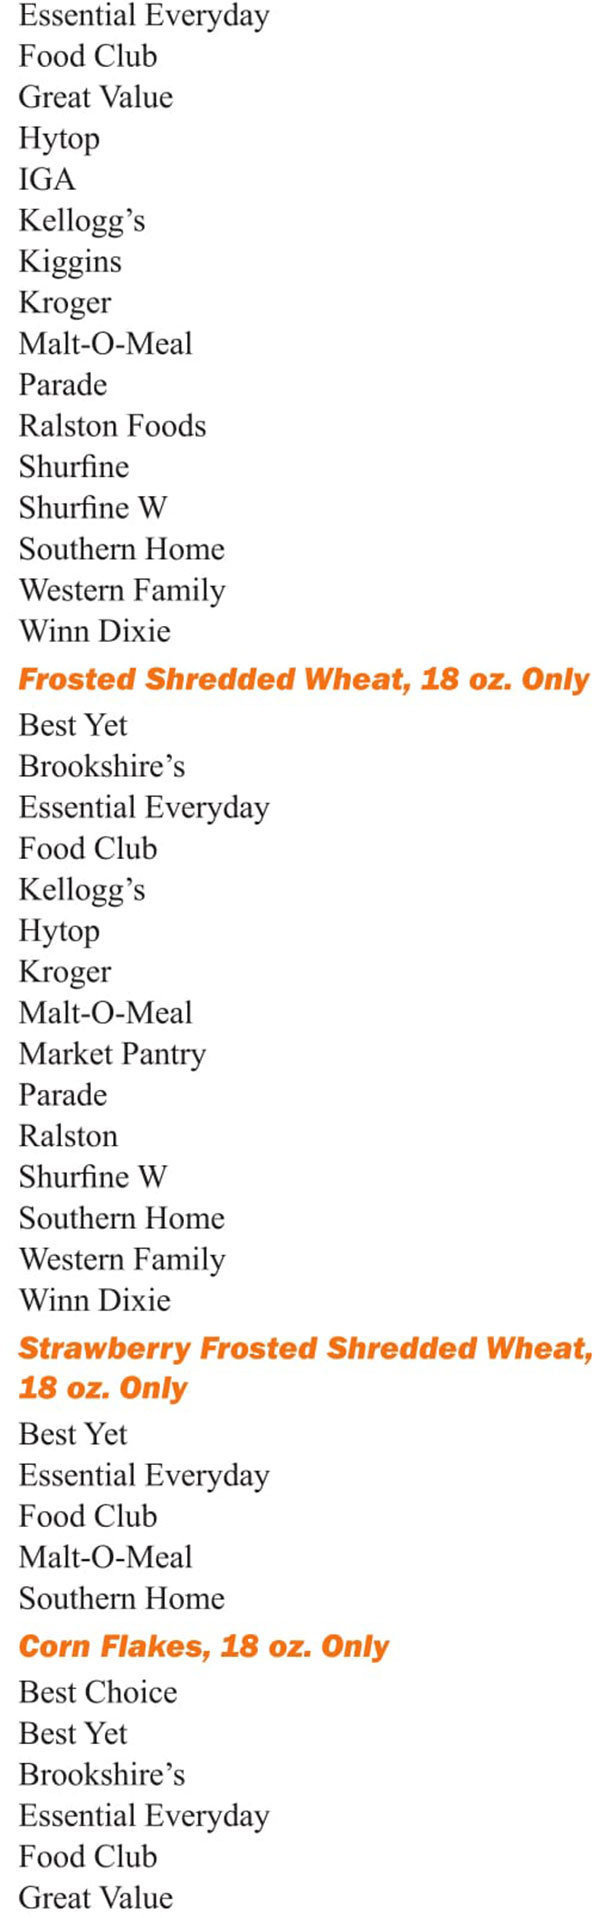 Louisiana WIC Food List Frosted Shredded Wheat, Strawberry Frosted Shredded Wheat and Corn Flakes